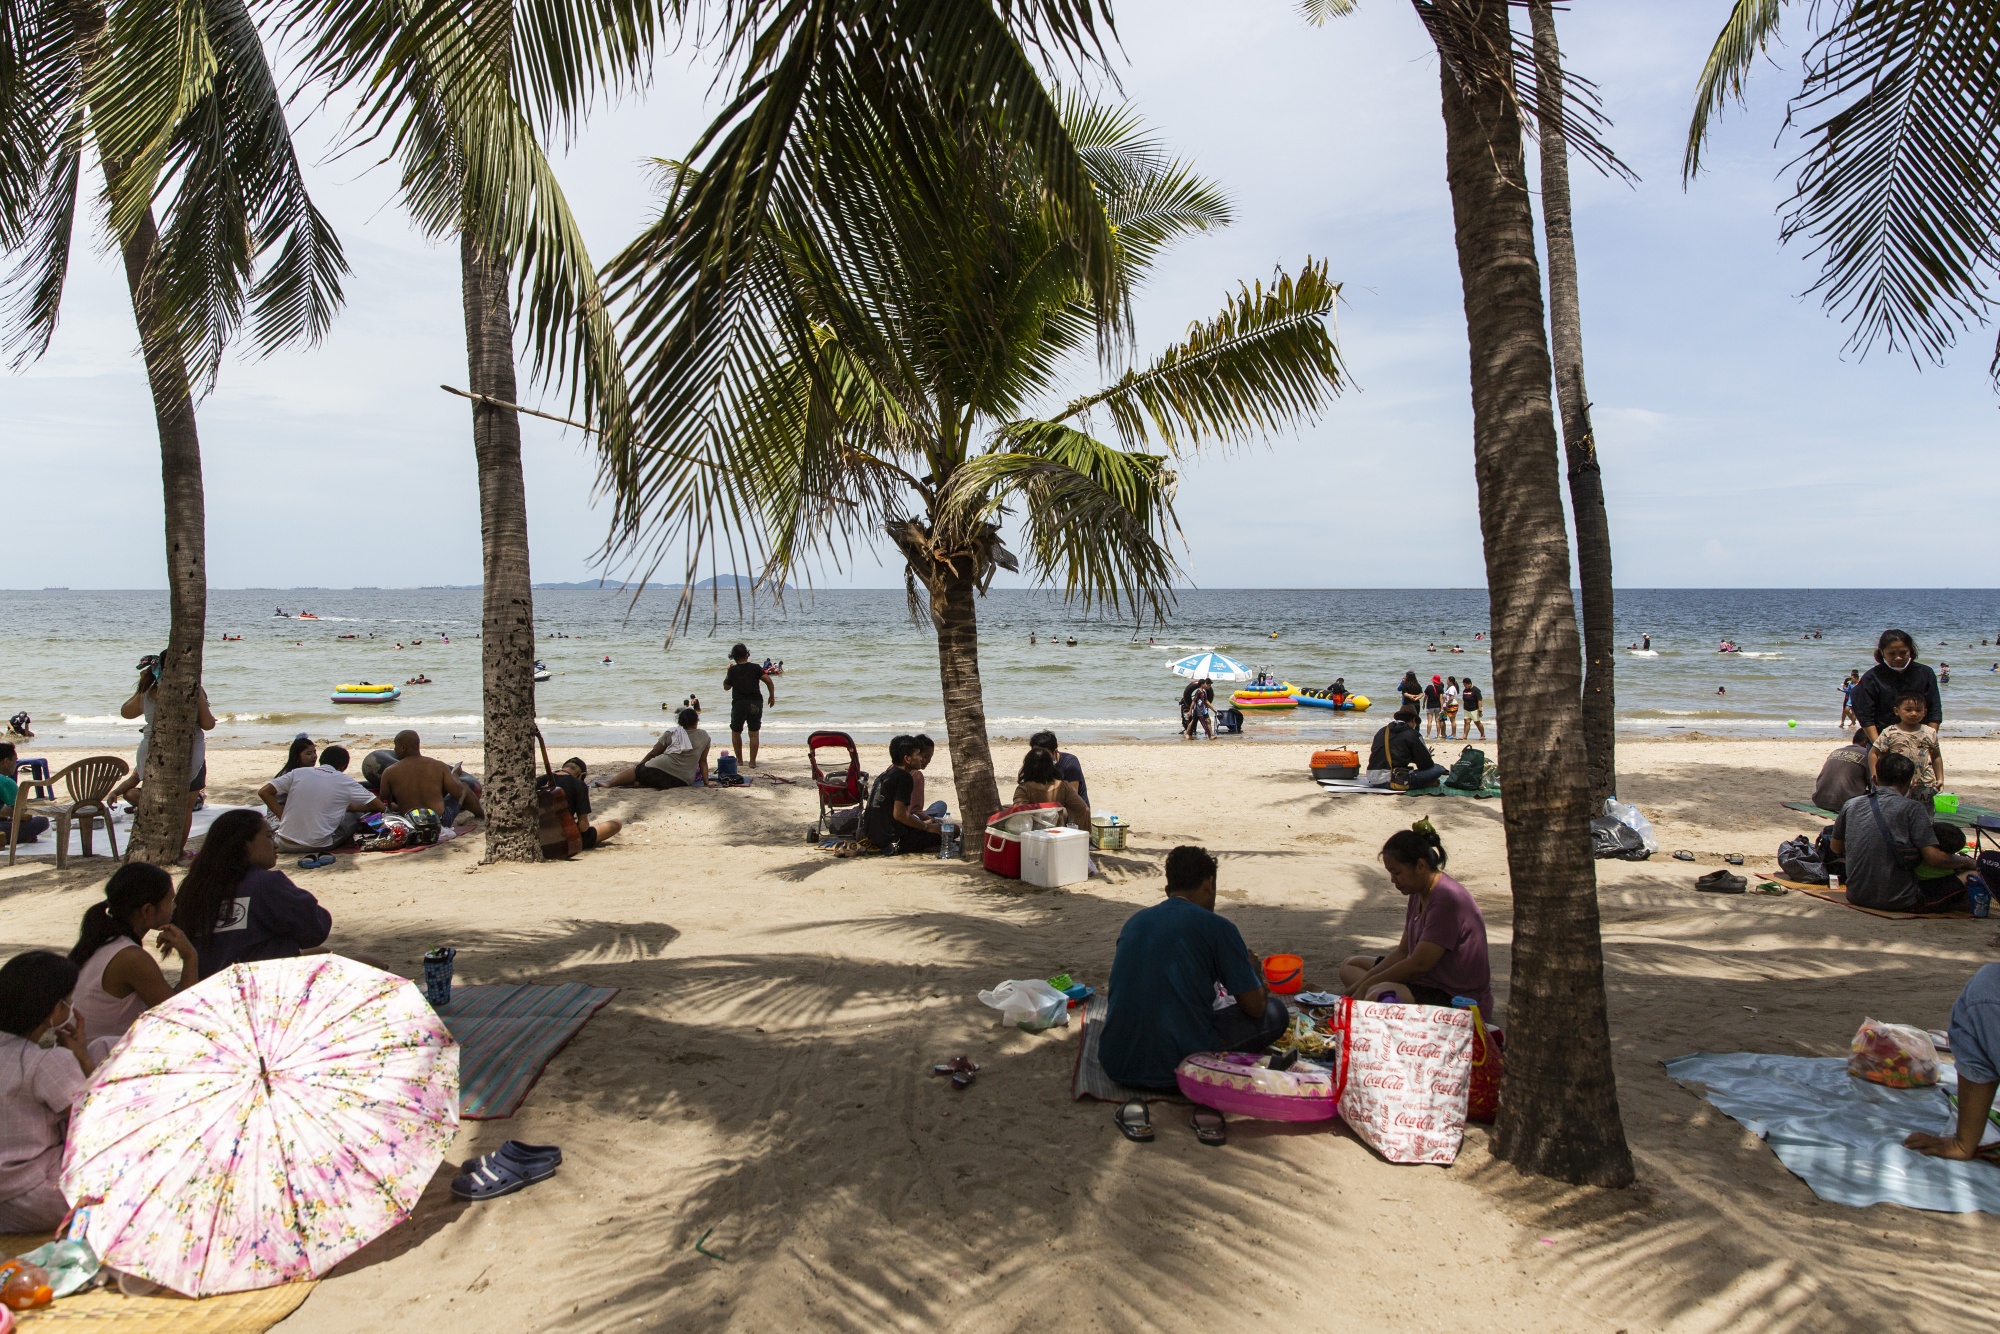 Visitors sit in groups as they relax on the beach and in the sea at Bangsaen Beach in Chonburi, Thailand, on June 14.